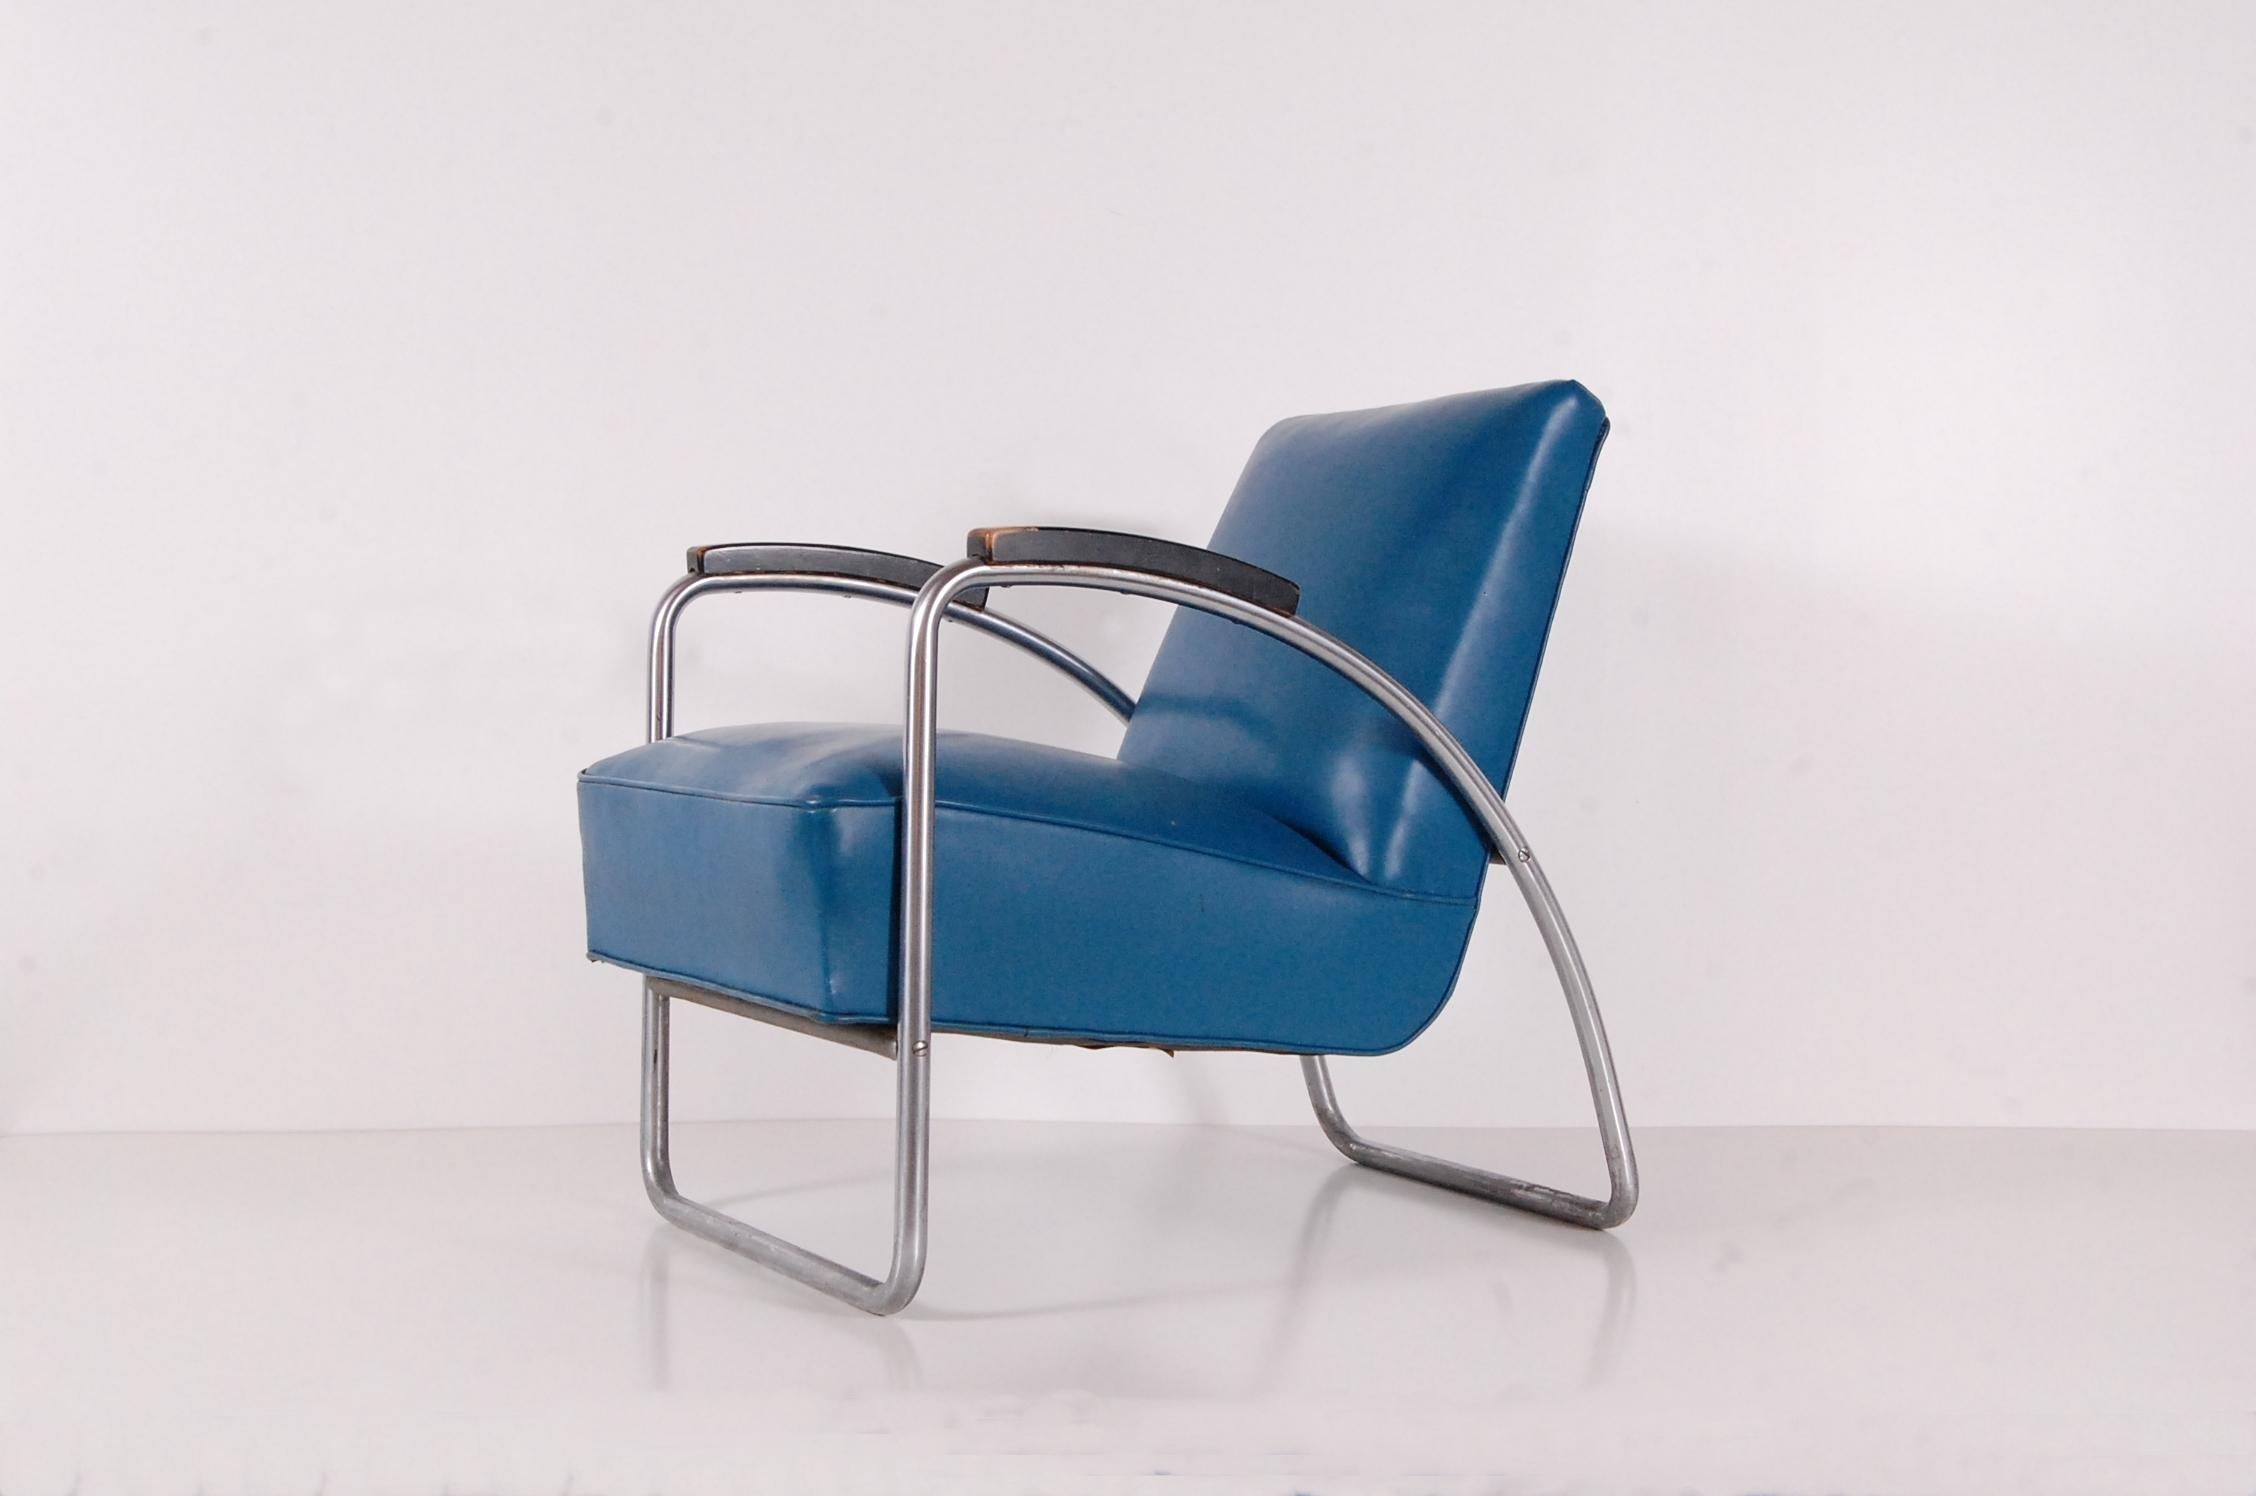 Thonet lounge chair in nickel-plated tubular steel with black lacquered wood arms, circa 1932-1938. Chair was removed from the famous Philadelphia Savings Fund Society building in Philadelphia, designed by William Lescaze and George Howe in 1932.